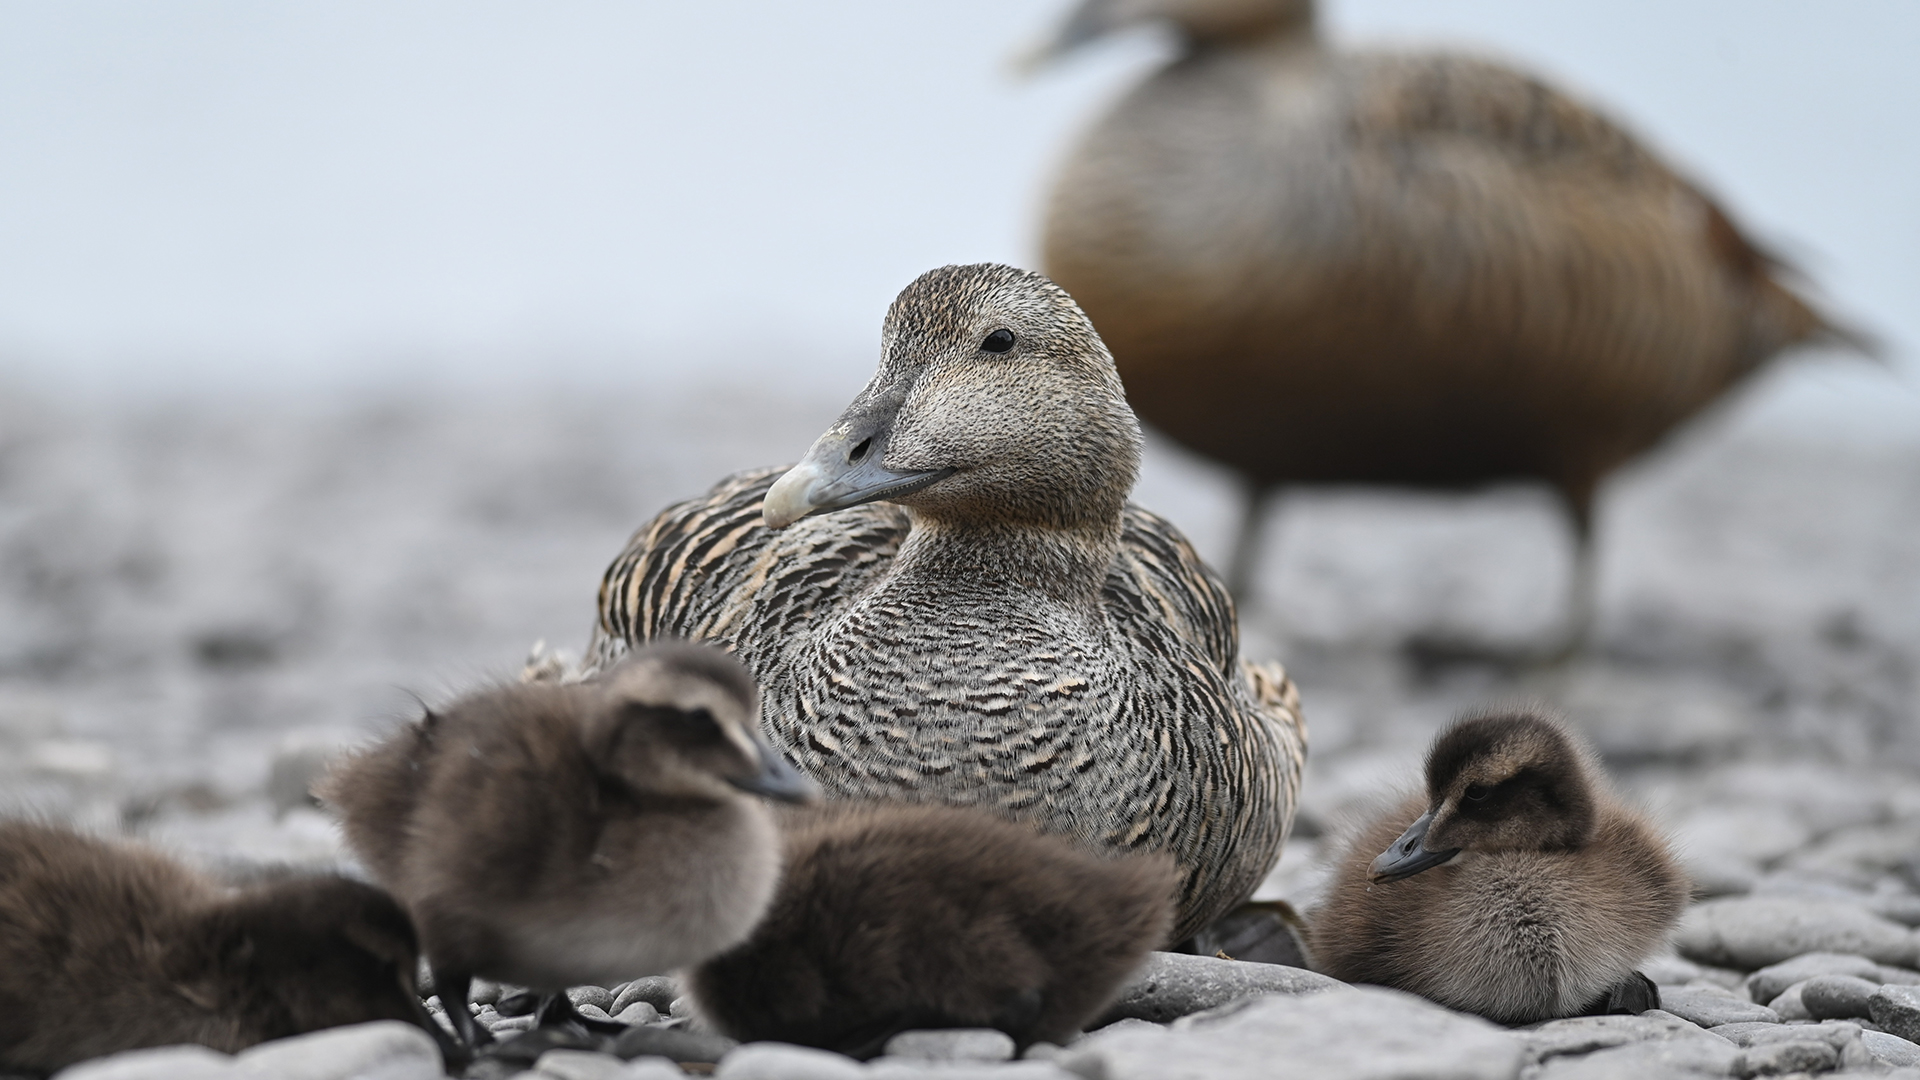 The island hosts 7,000 breeding common eiders. For decades, farmers have collected down shed by the chicks, replacing it with hay to maintain the nest’s insulative properties before processing and selling it globally. Iceland’s common eiders contribute to 90% of the worldwide eider down supply.